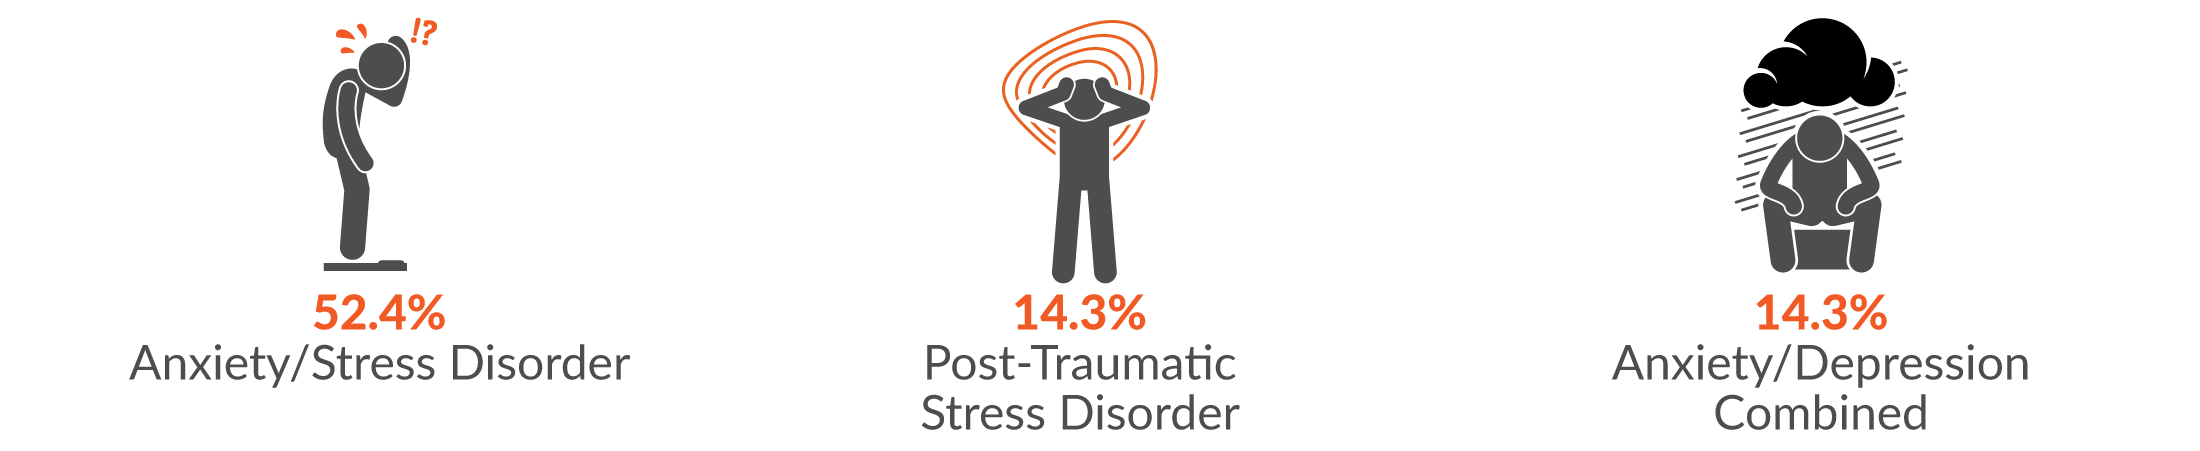 52.4% Anxiety/stress disorder; 14.3% Post-traumatic stress disorder; and 14.3% Anxiety/depression combined.